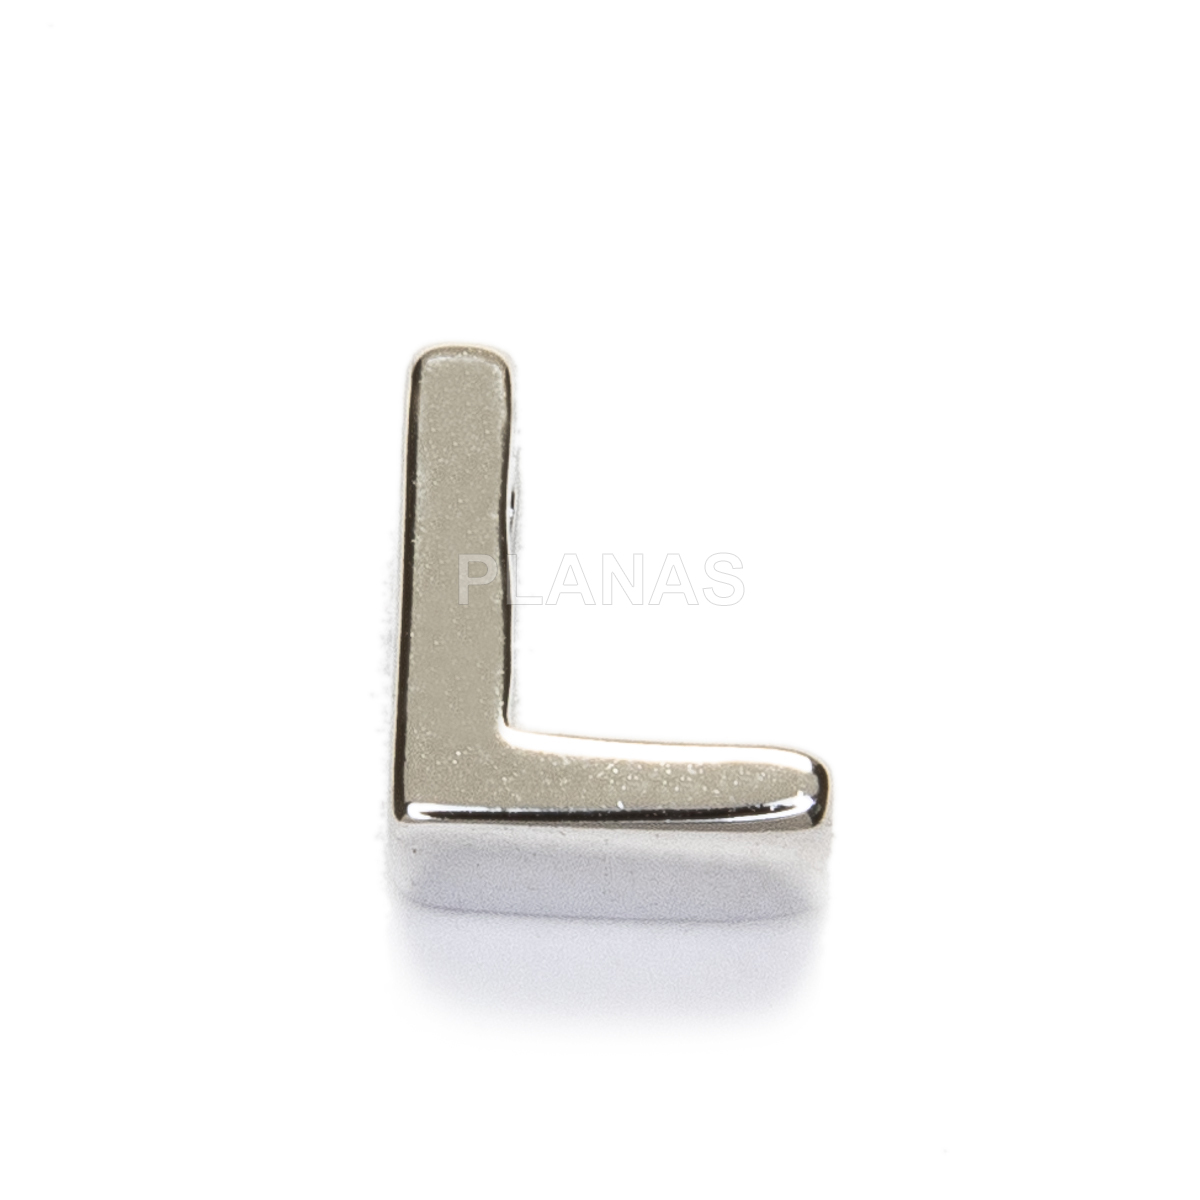 Interpiece sterling silver letter.